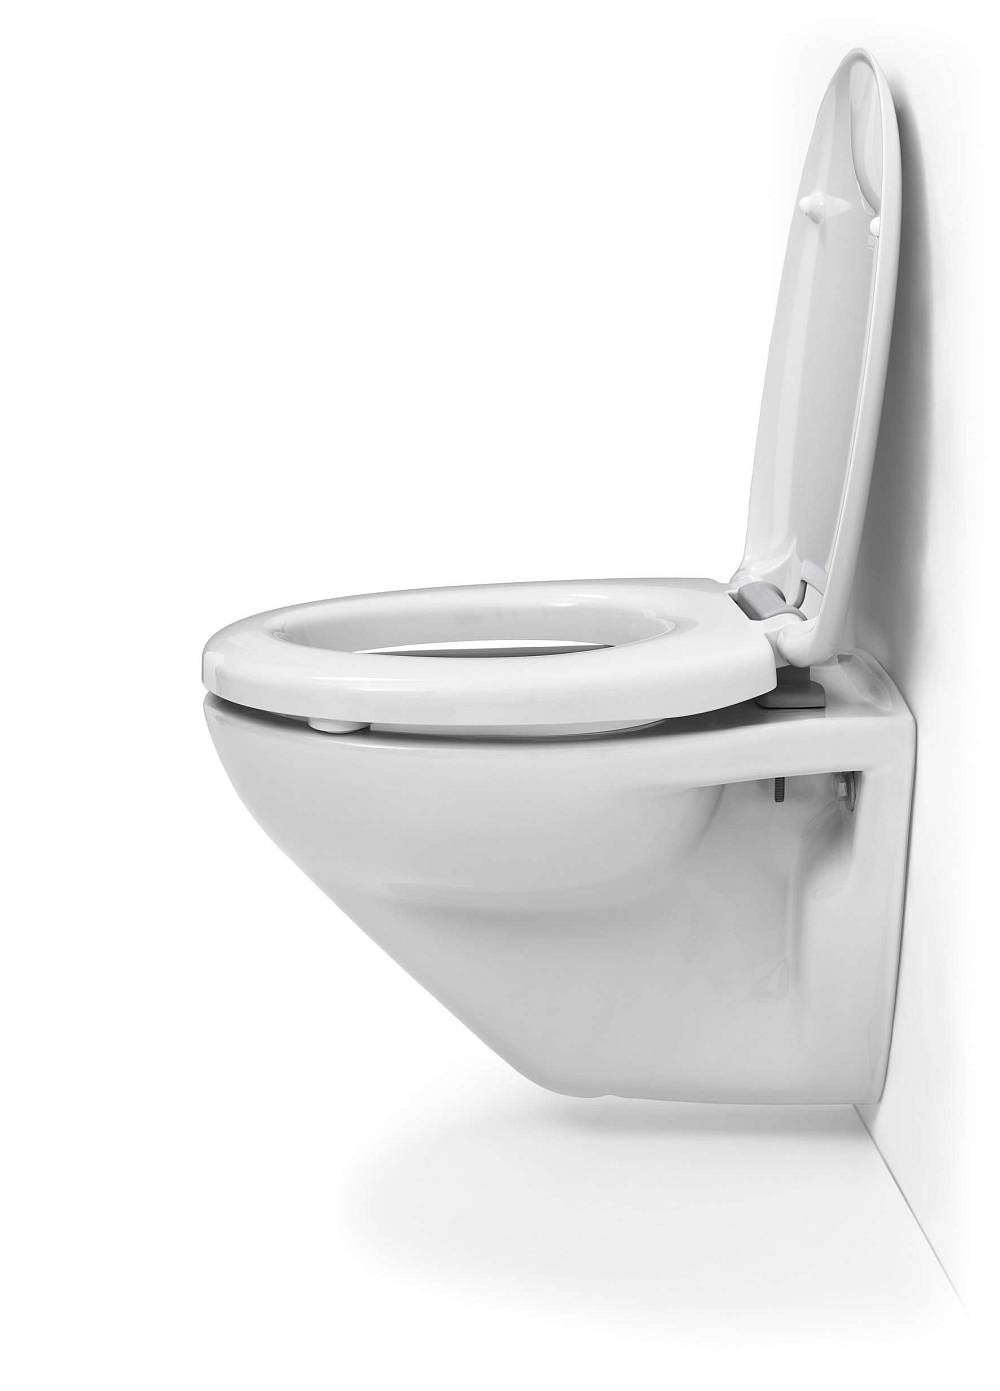 Raised toilet seat from HAROMED with open lid.